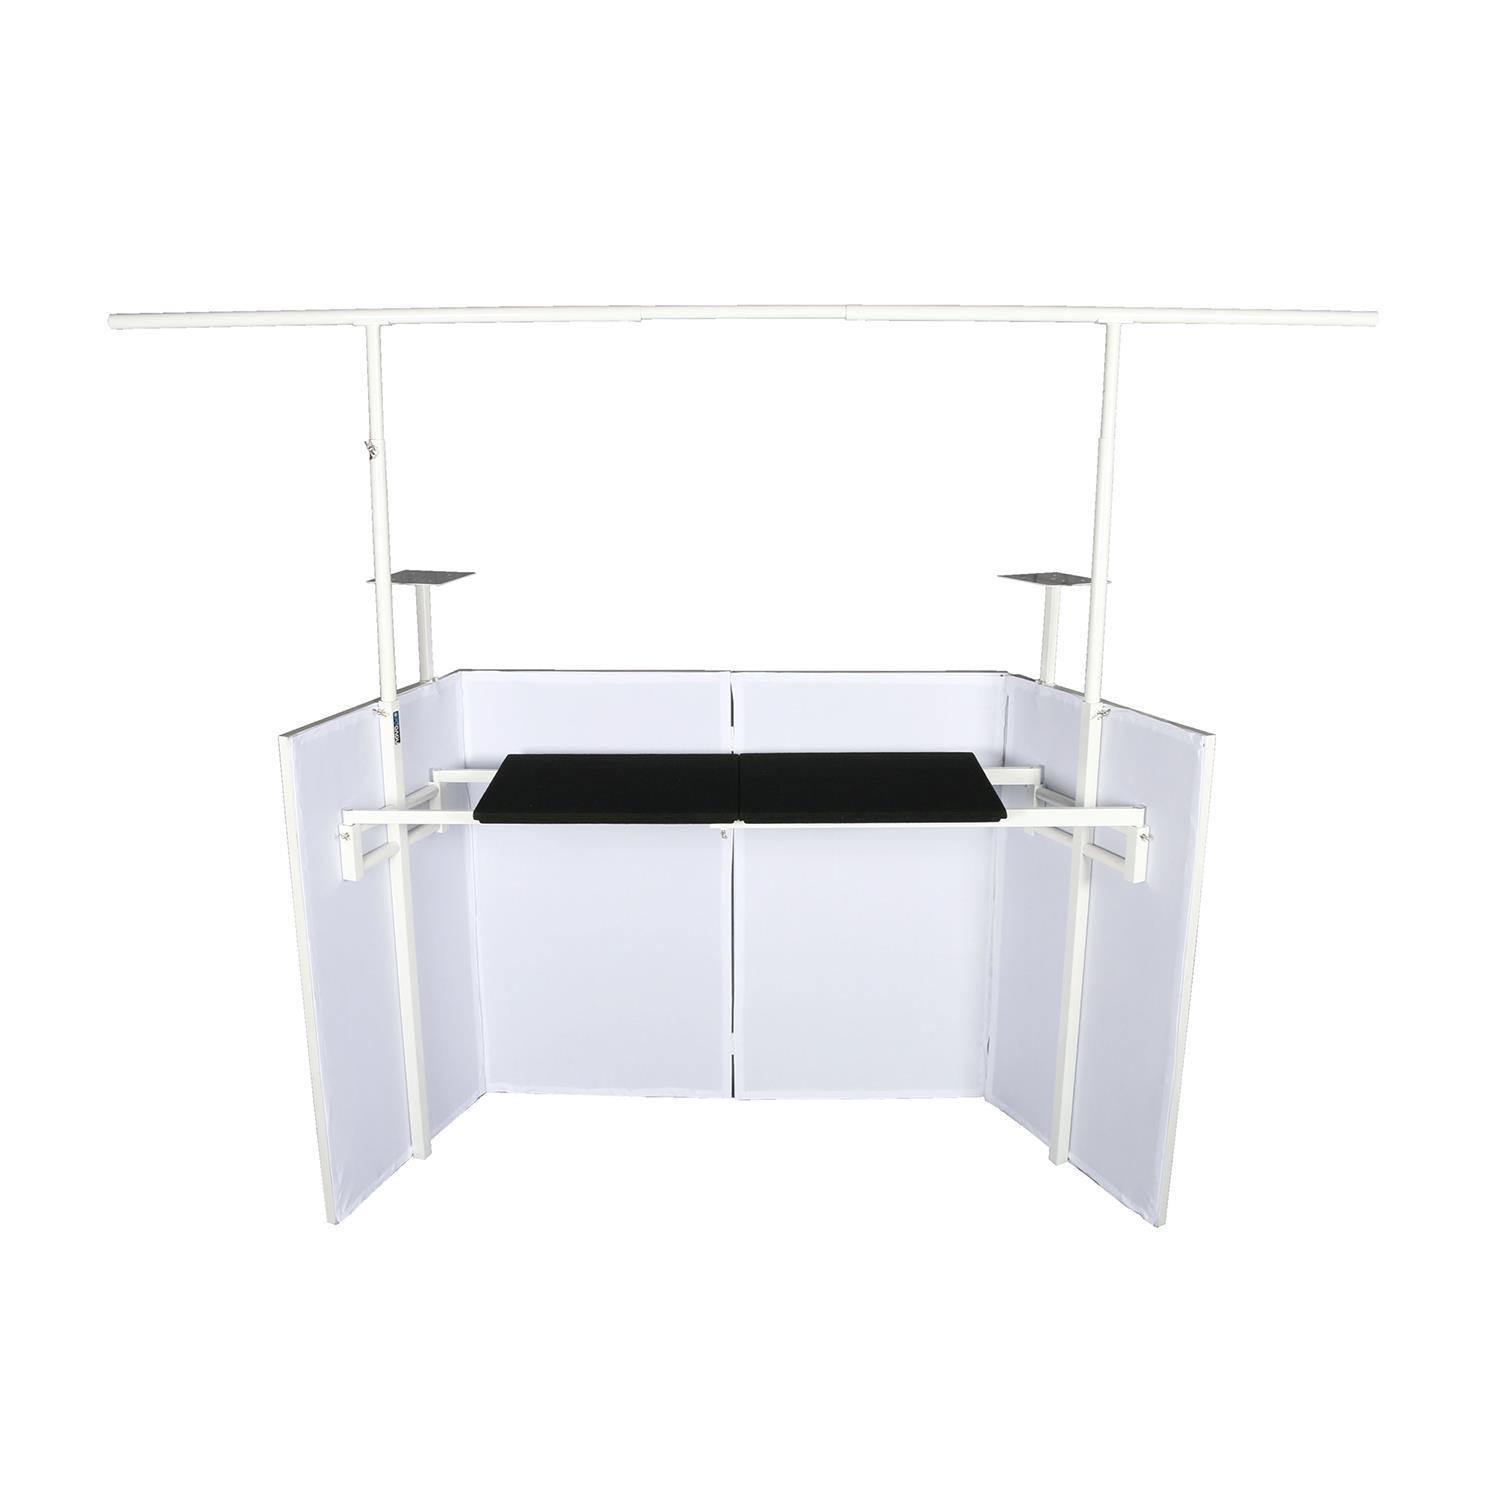 Novopro SDX V2 WHITE foldable DJ Booth with lighting rig,podiums and bag - DY Pro Audio